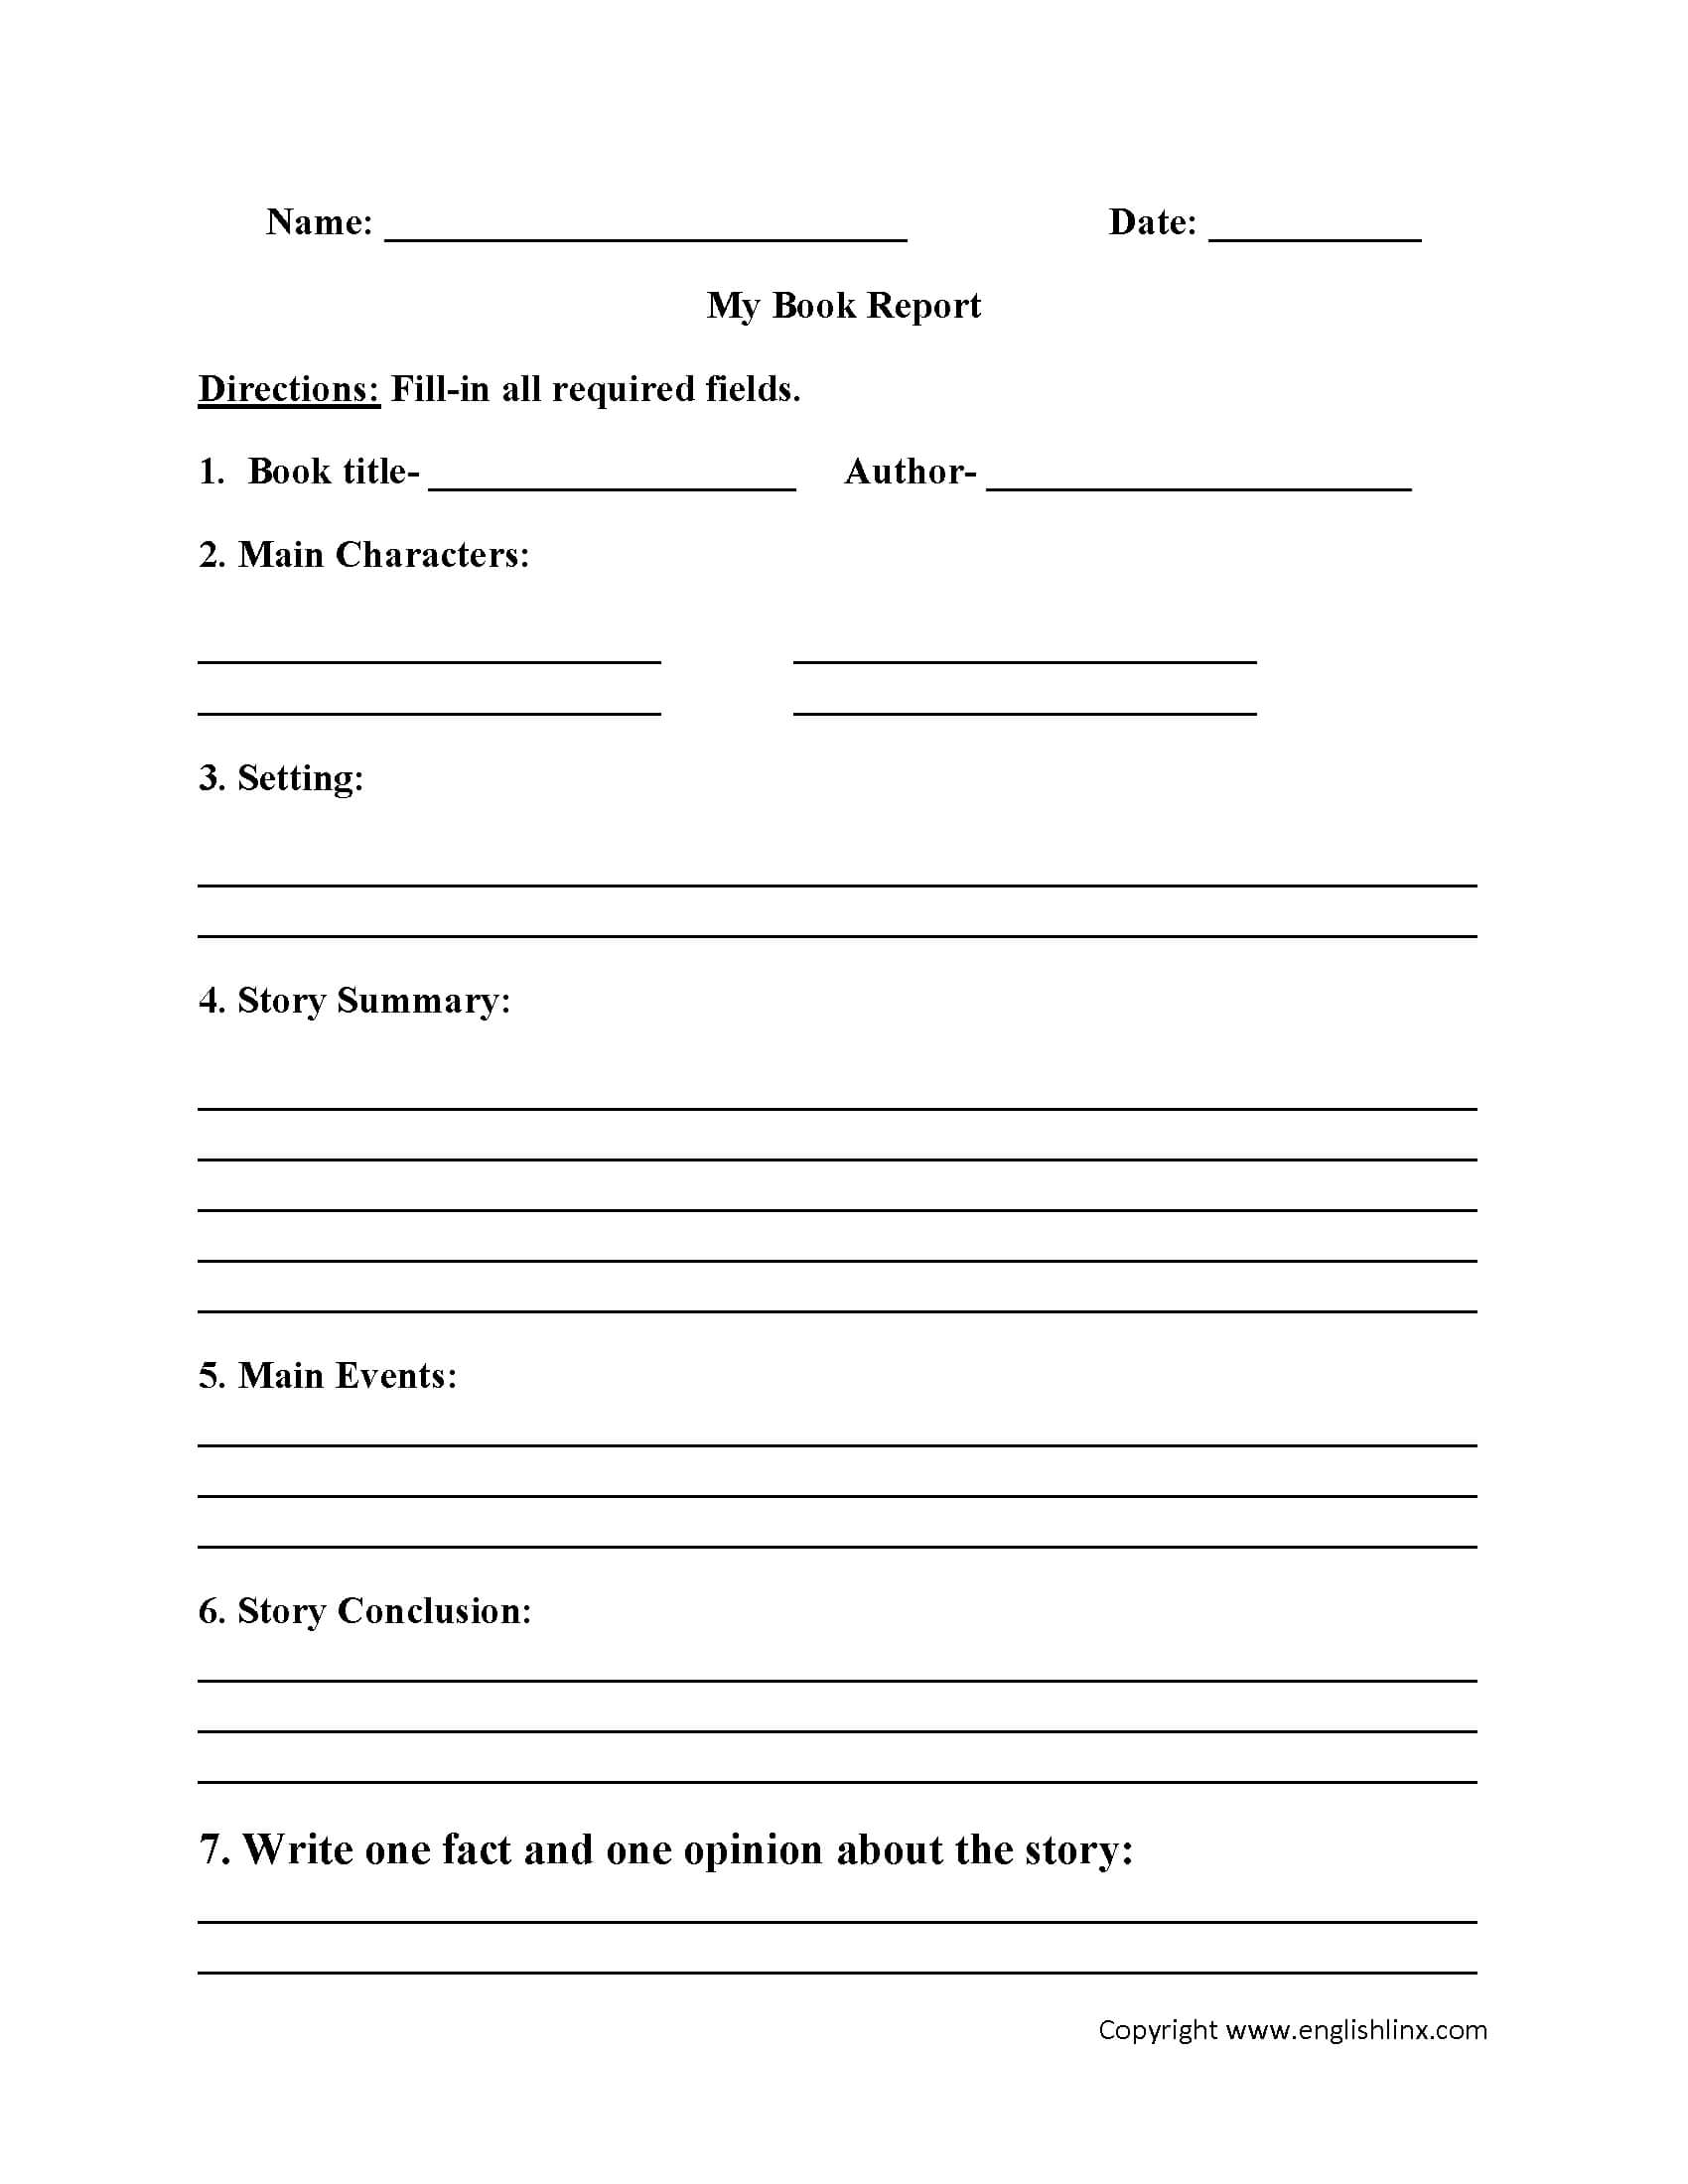 My Book Report Worksheet | Englishlinx Board | Book Throughout First Grade Book Report Template